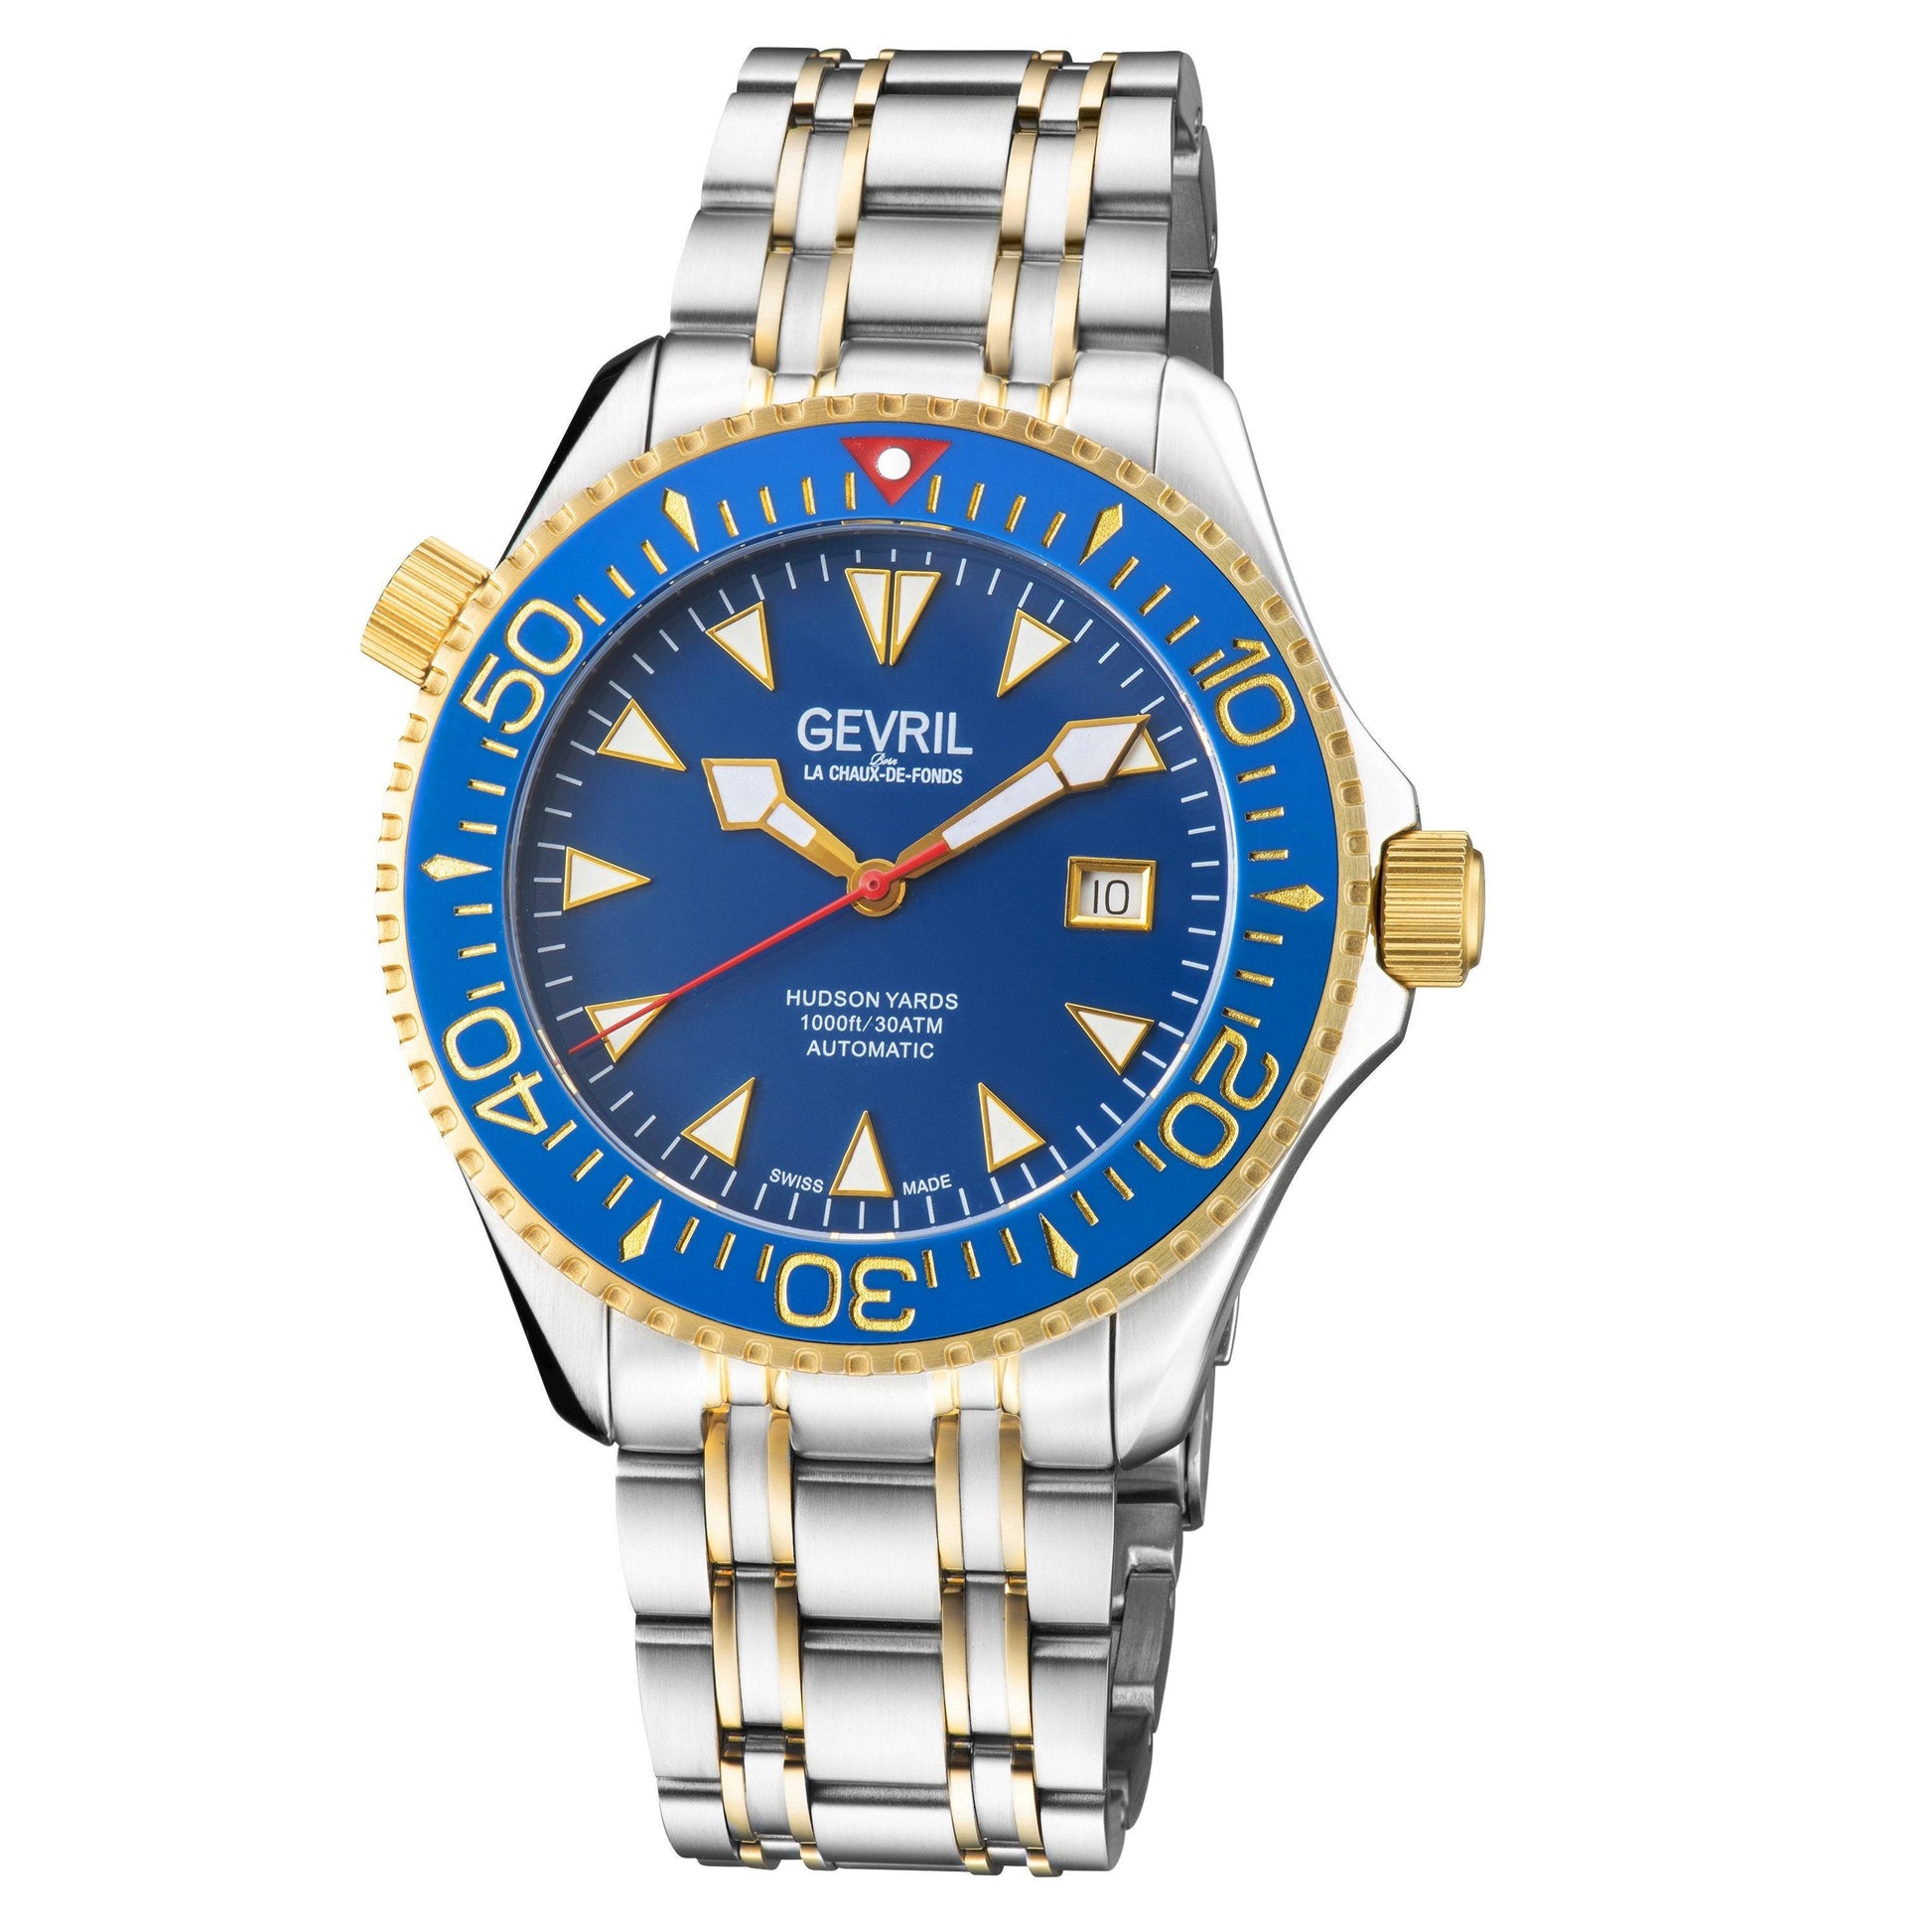 Gevril-Luxury-Swiss-Watches-Gevril Hudson Yards - Diver-48803